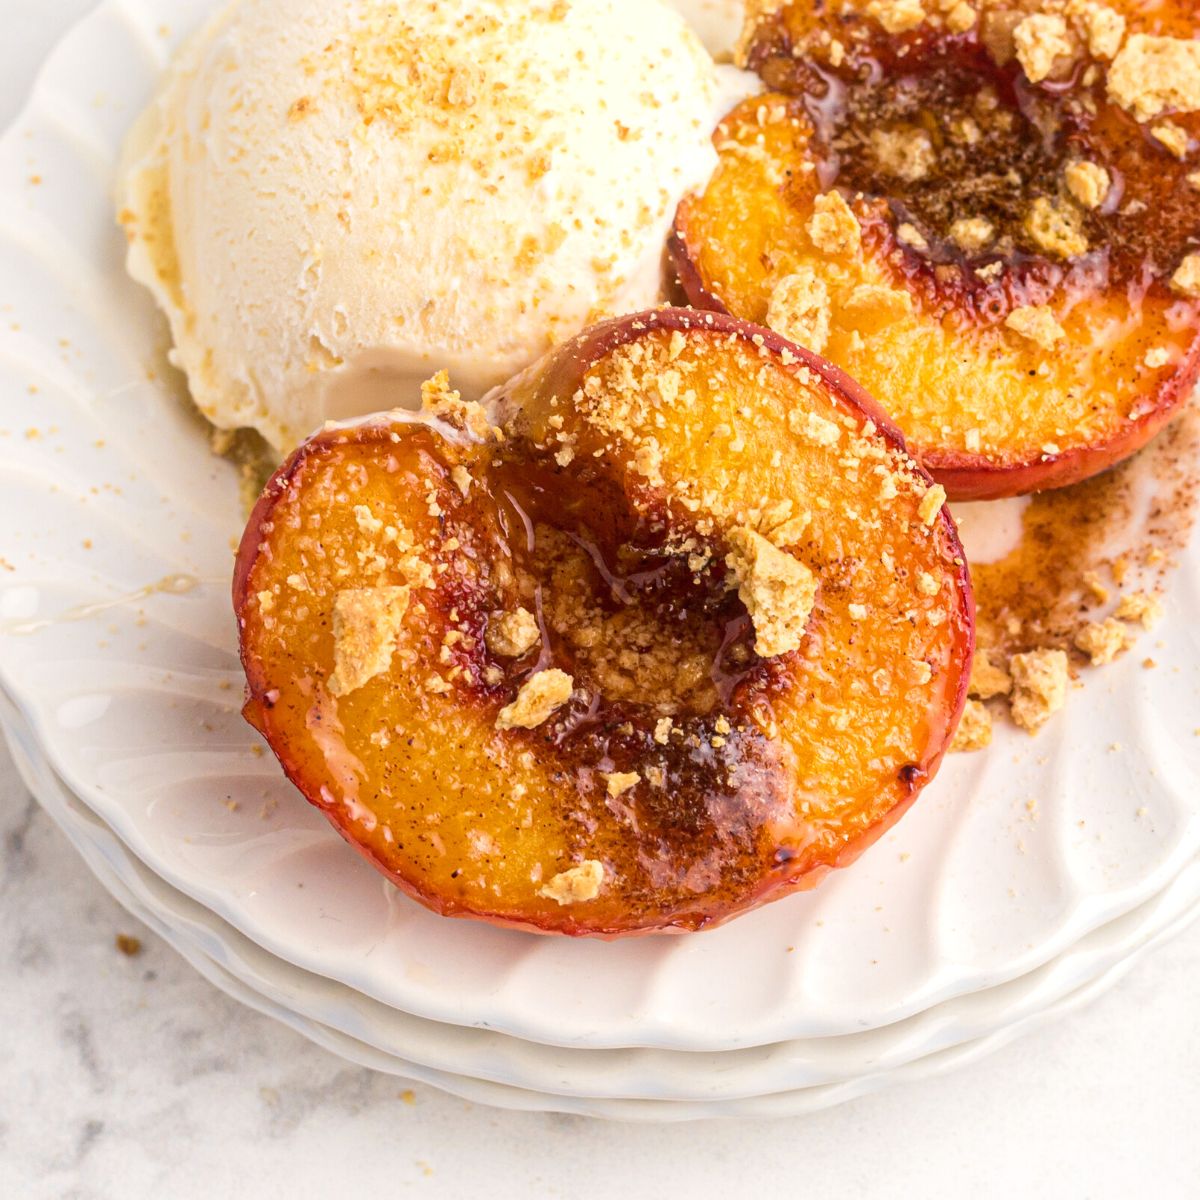 Golden juicy peaches on a white plate and served with vanilla ice cream